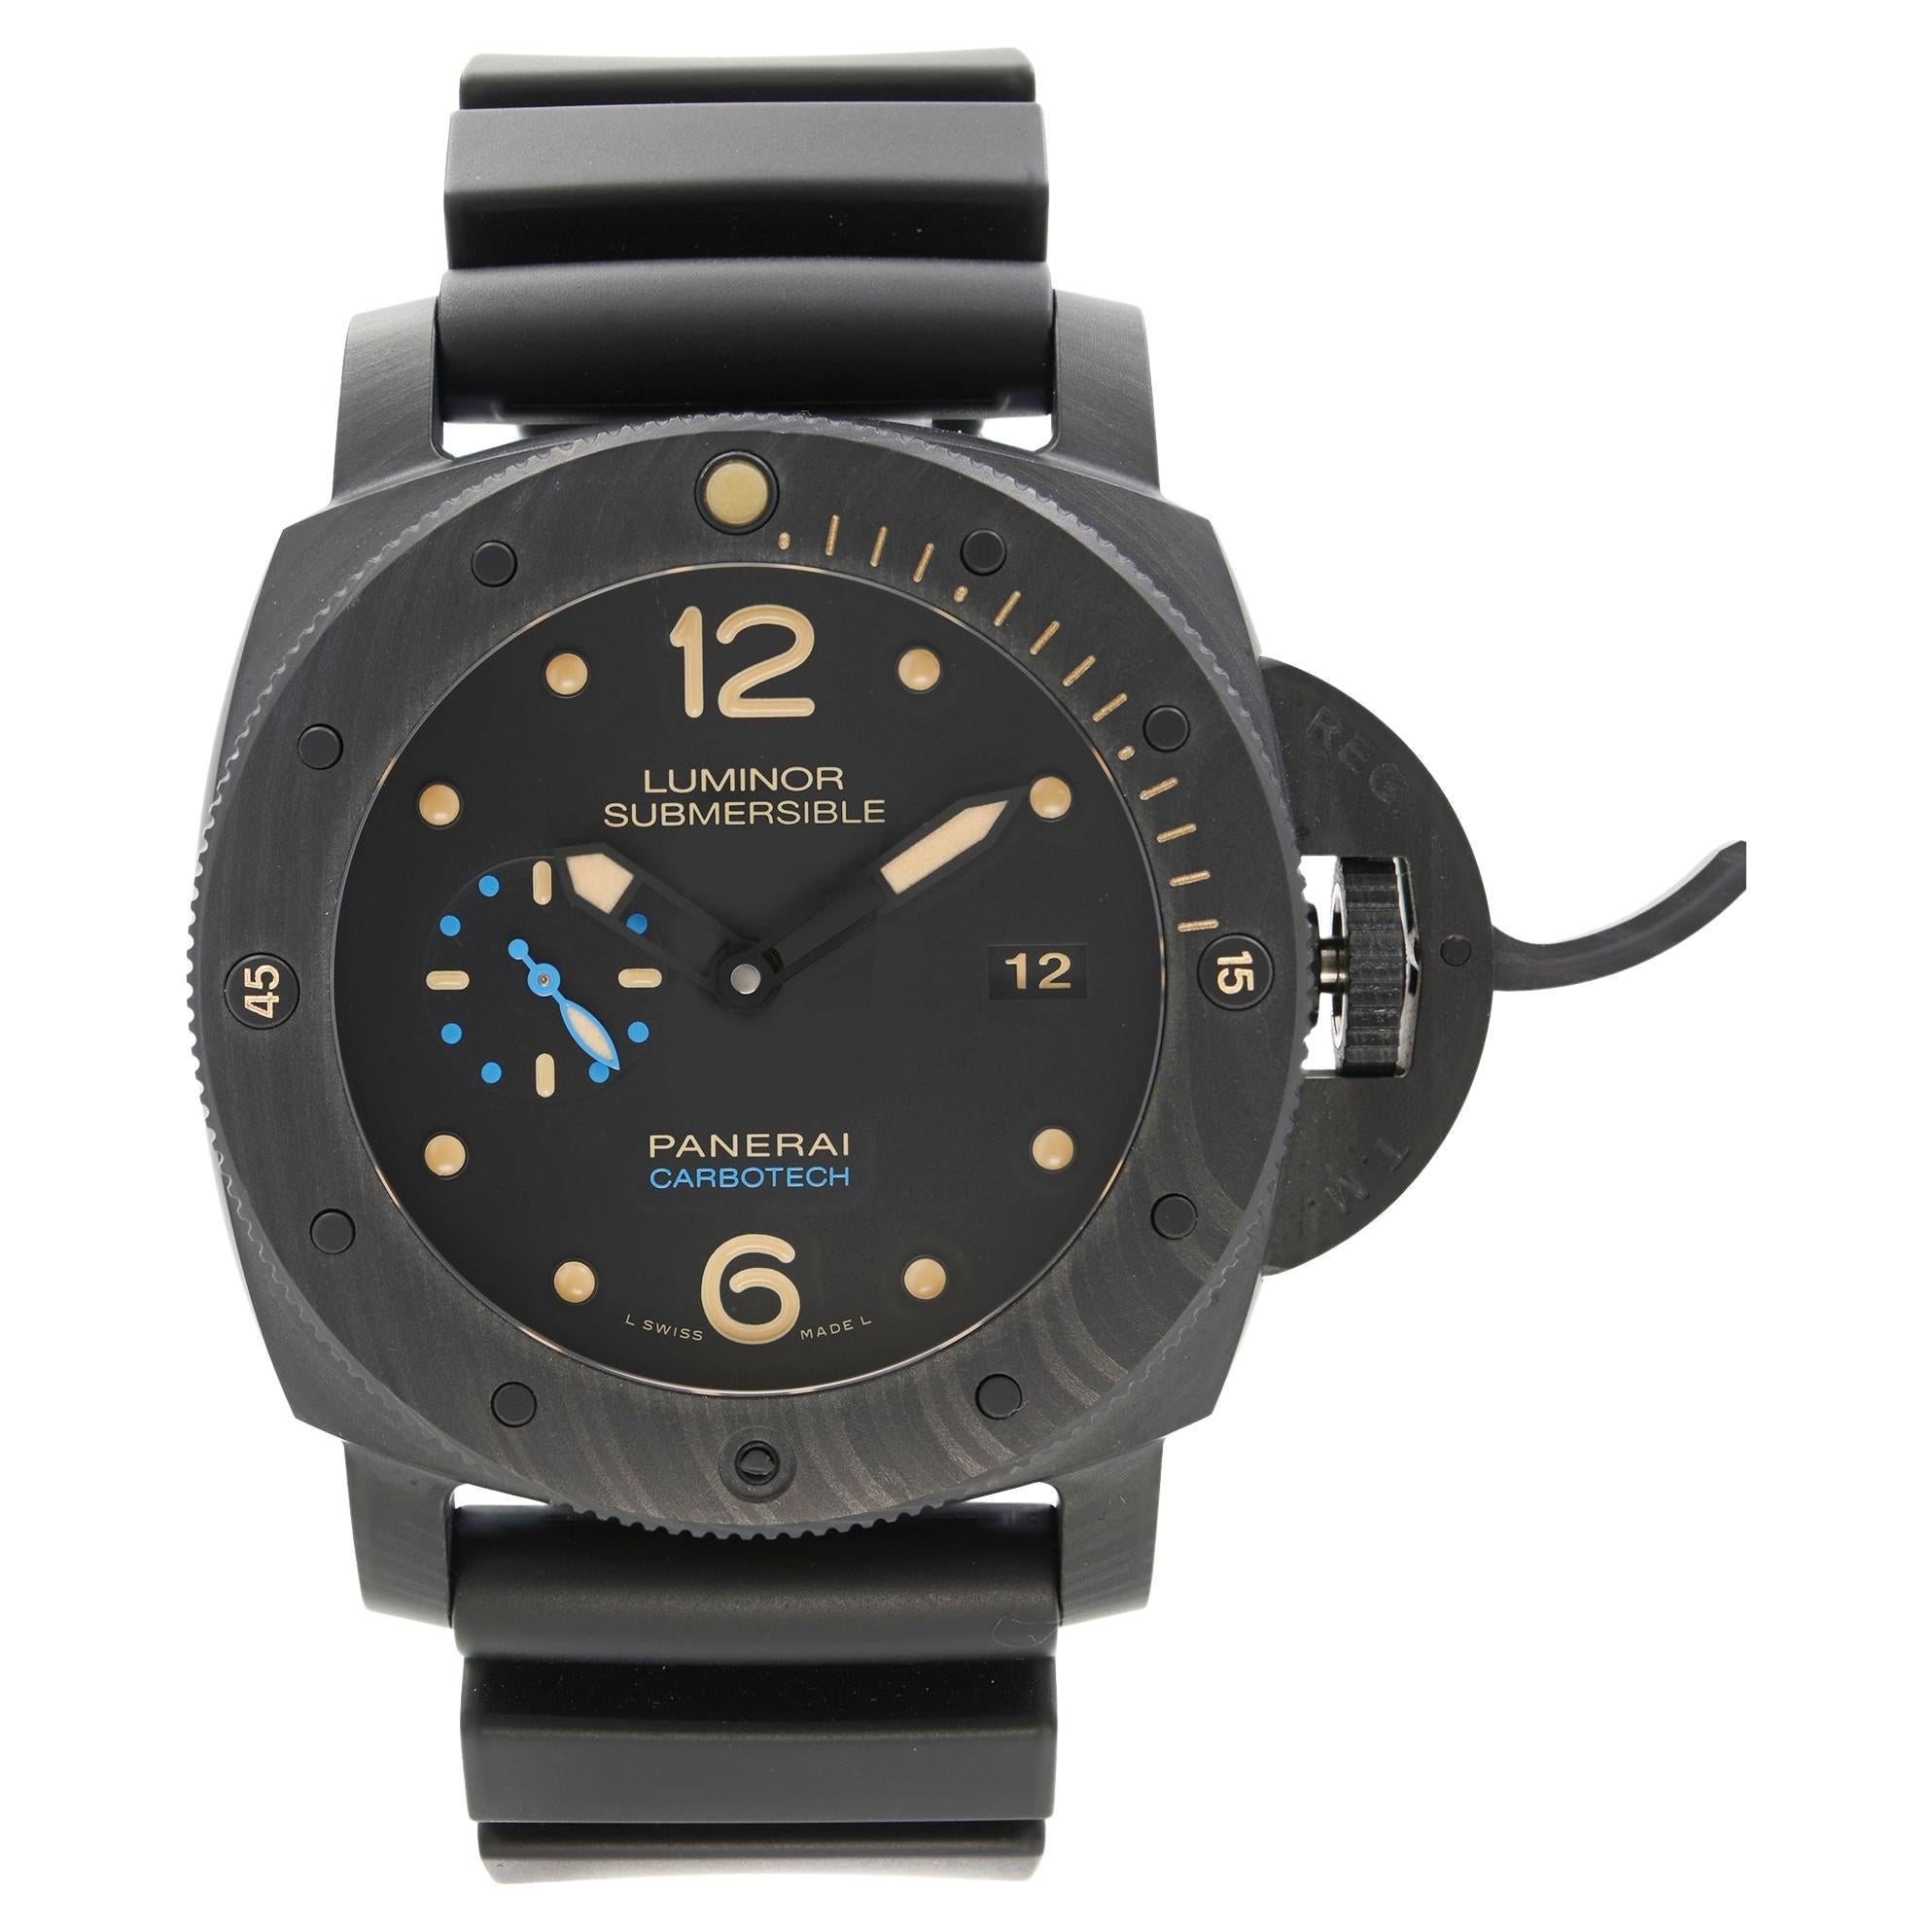 Panerai Luminor Submersible 1950 3 Days Carbotech Black Dial Mens Watch PAM00616 For Sale